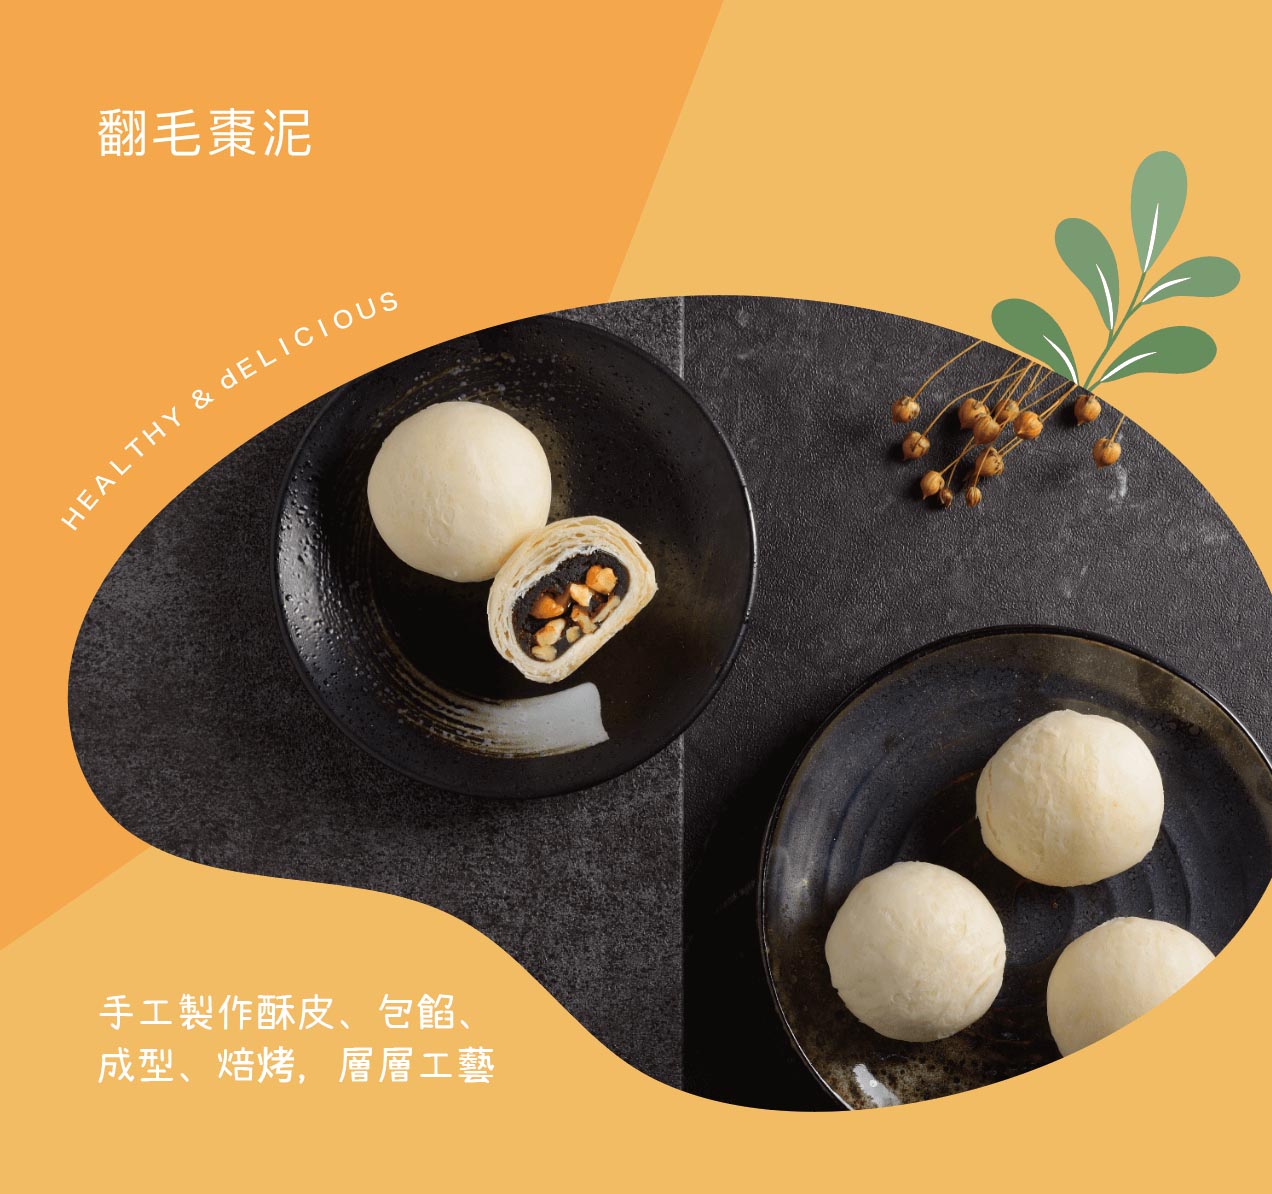 Wholesome - Date and Walnuts Pastry 【8 pcs】